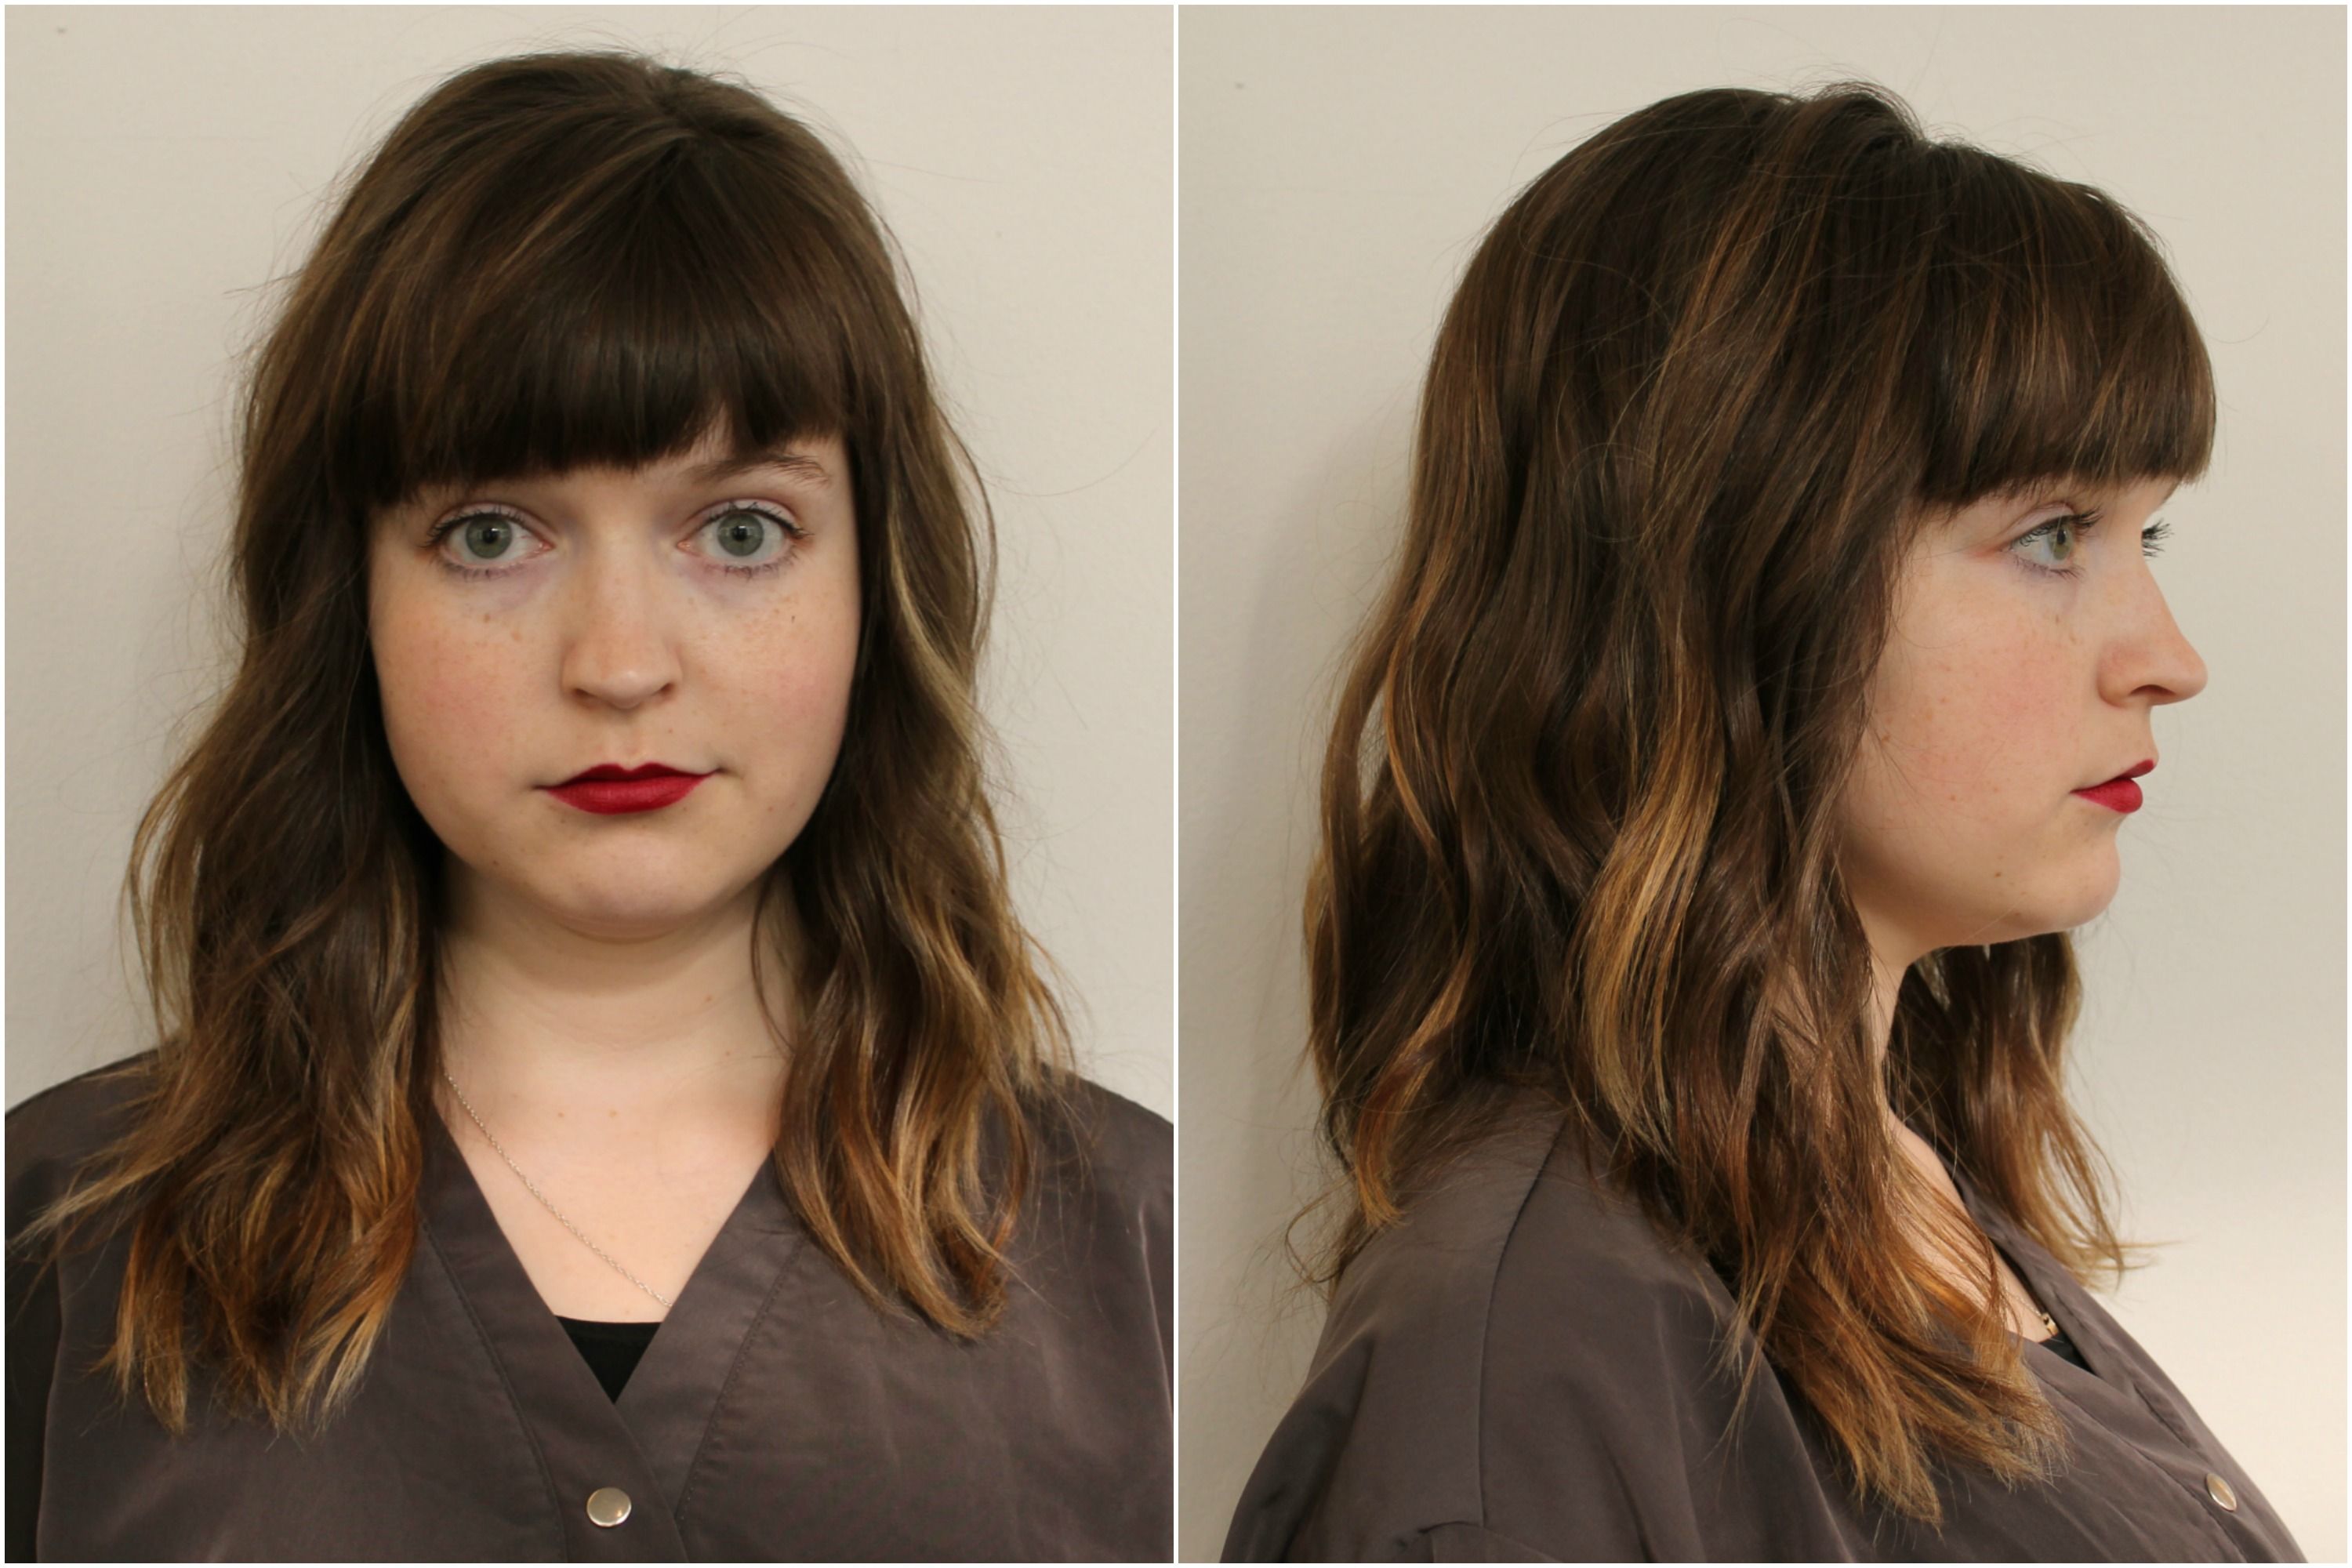 Hair Contouring Makeovers Before and After —Highlights Make Hair Look  Thicker